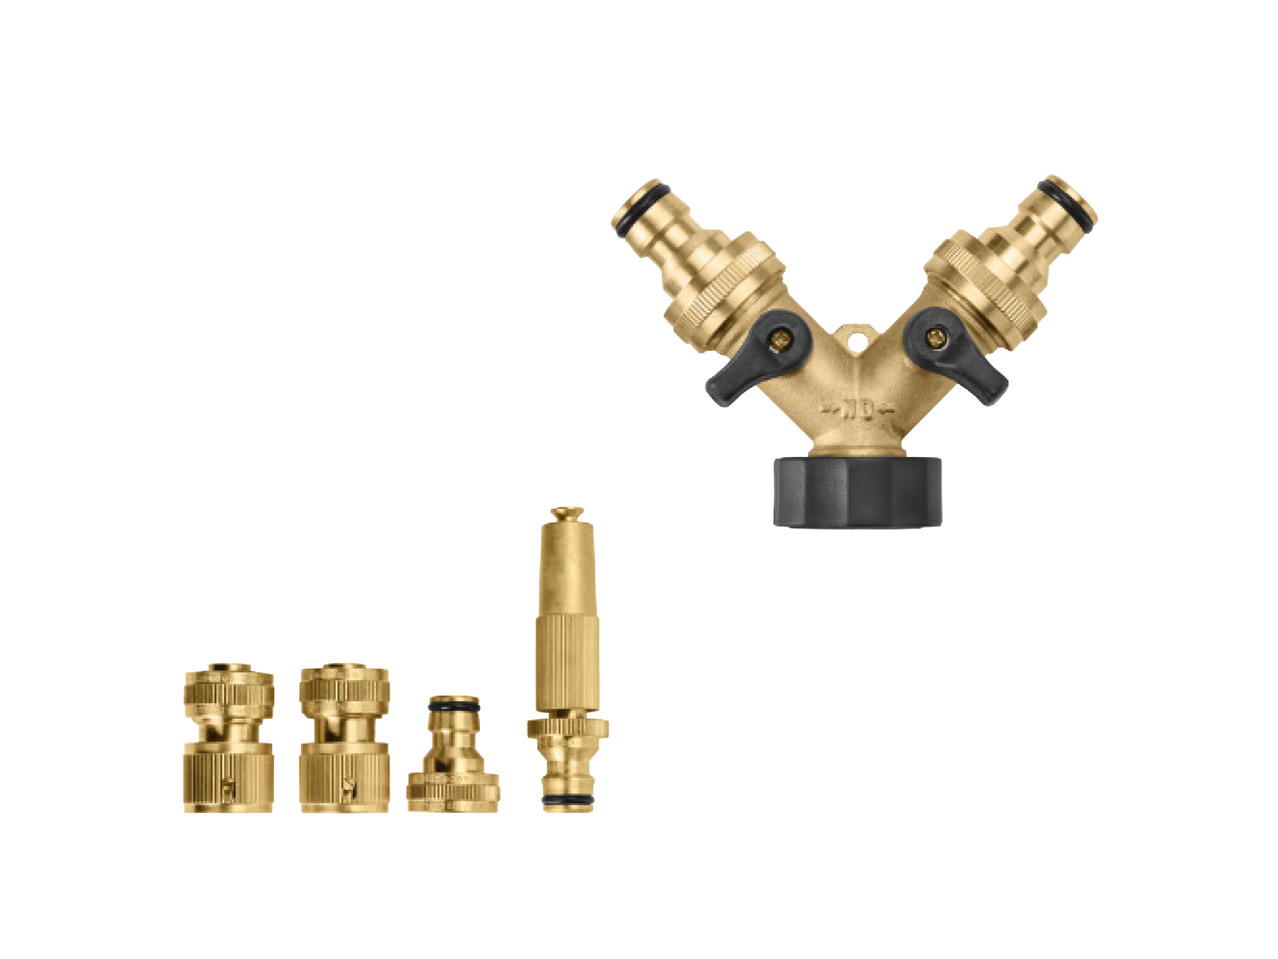 Brass Connector System